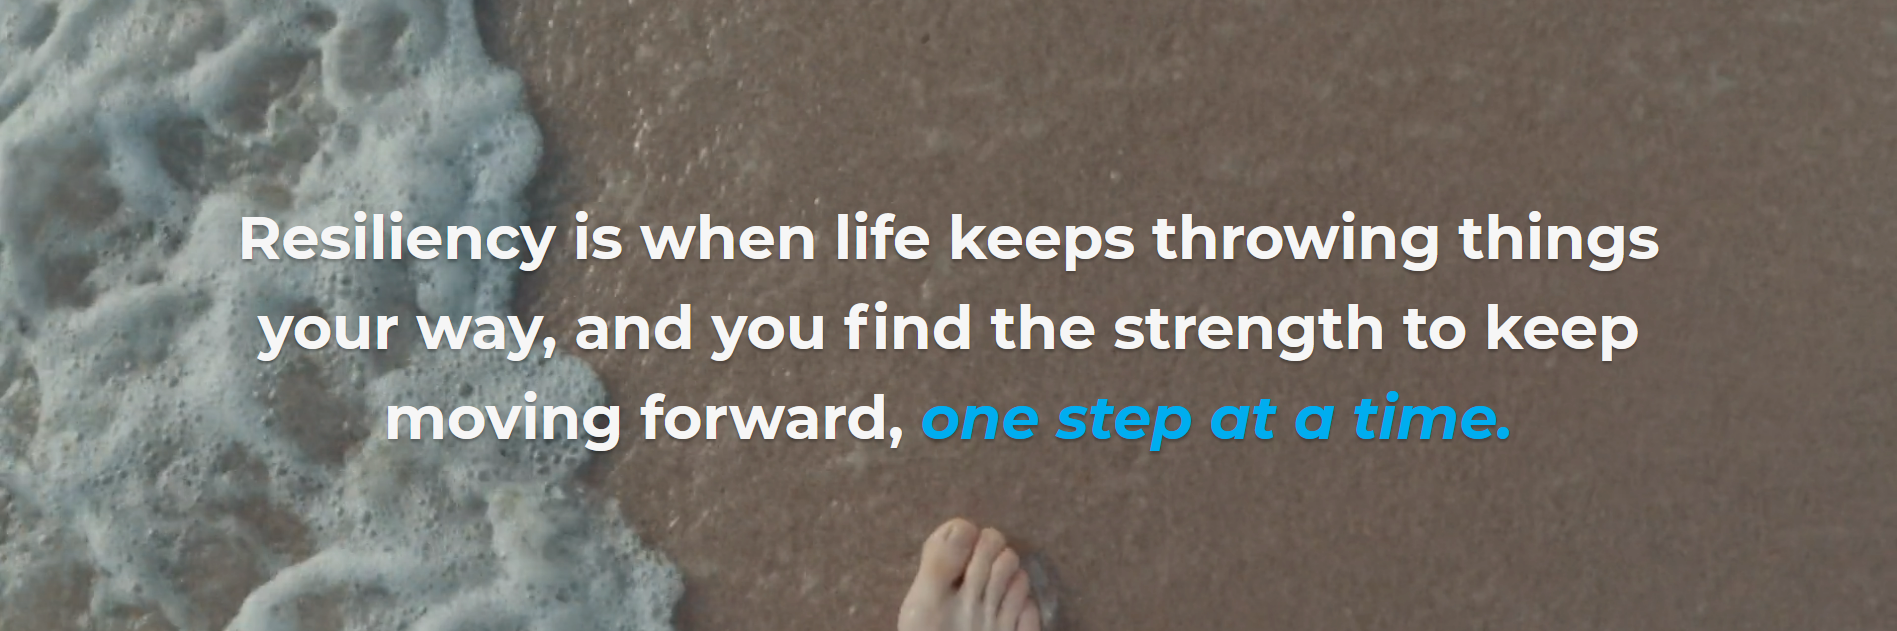 One Step At a Time